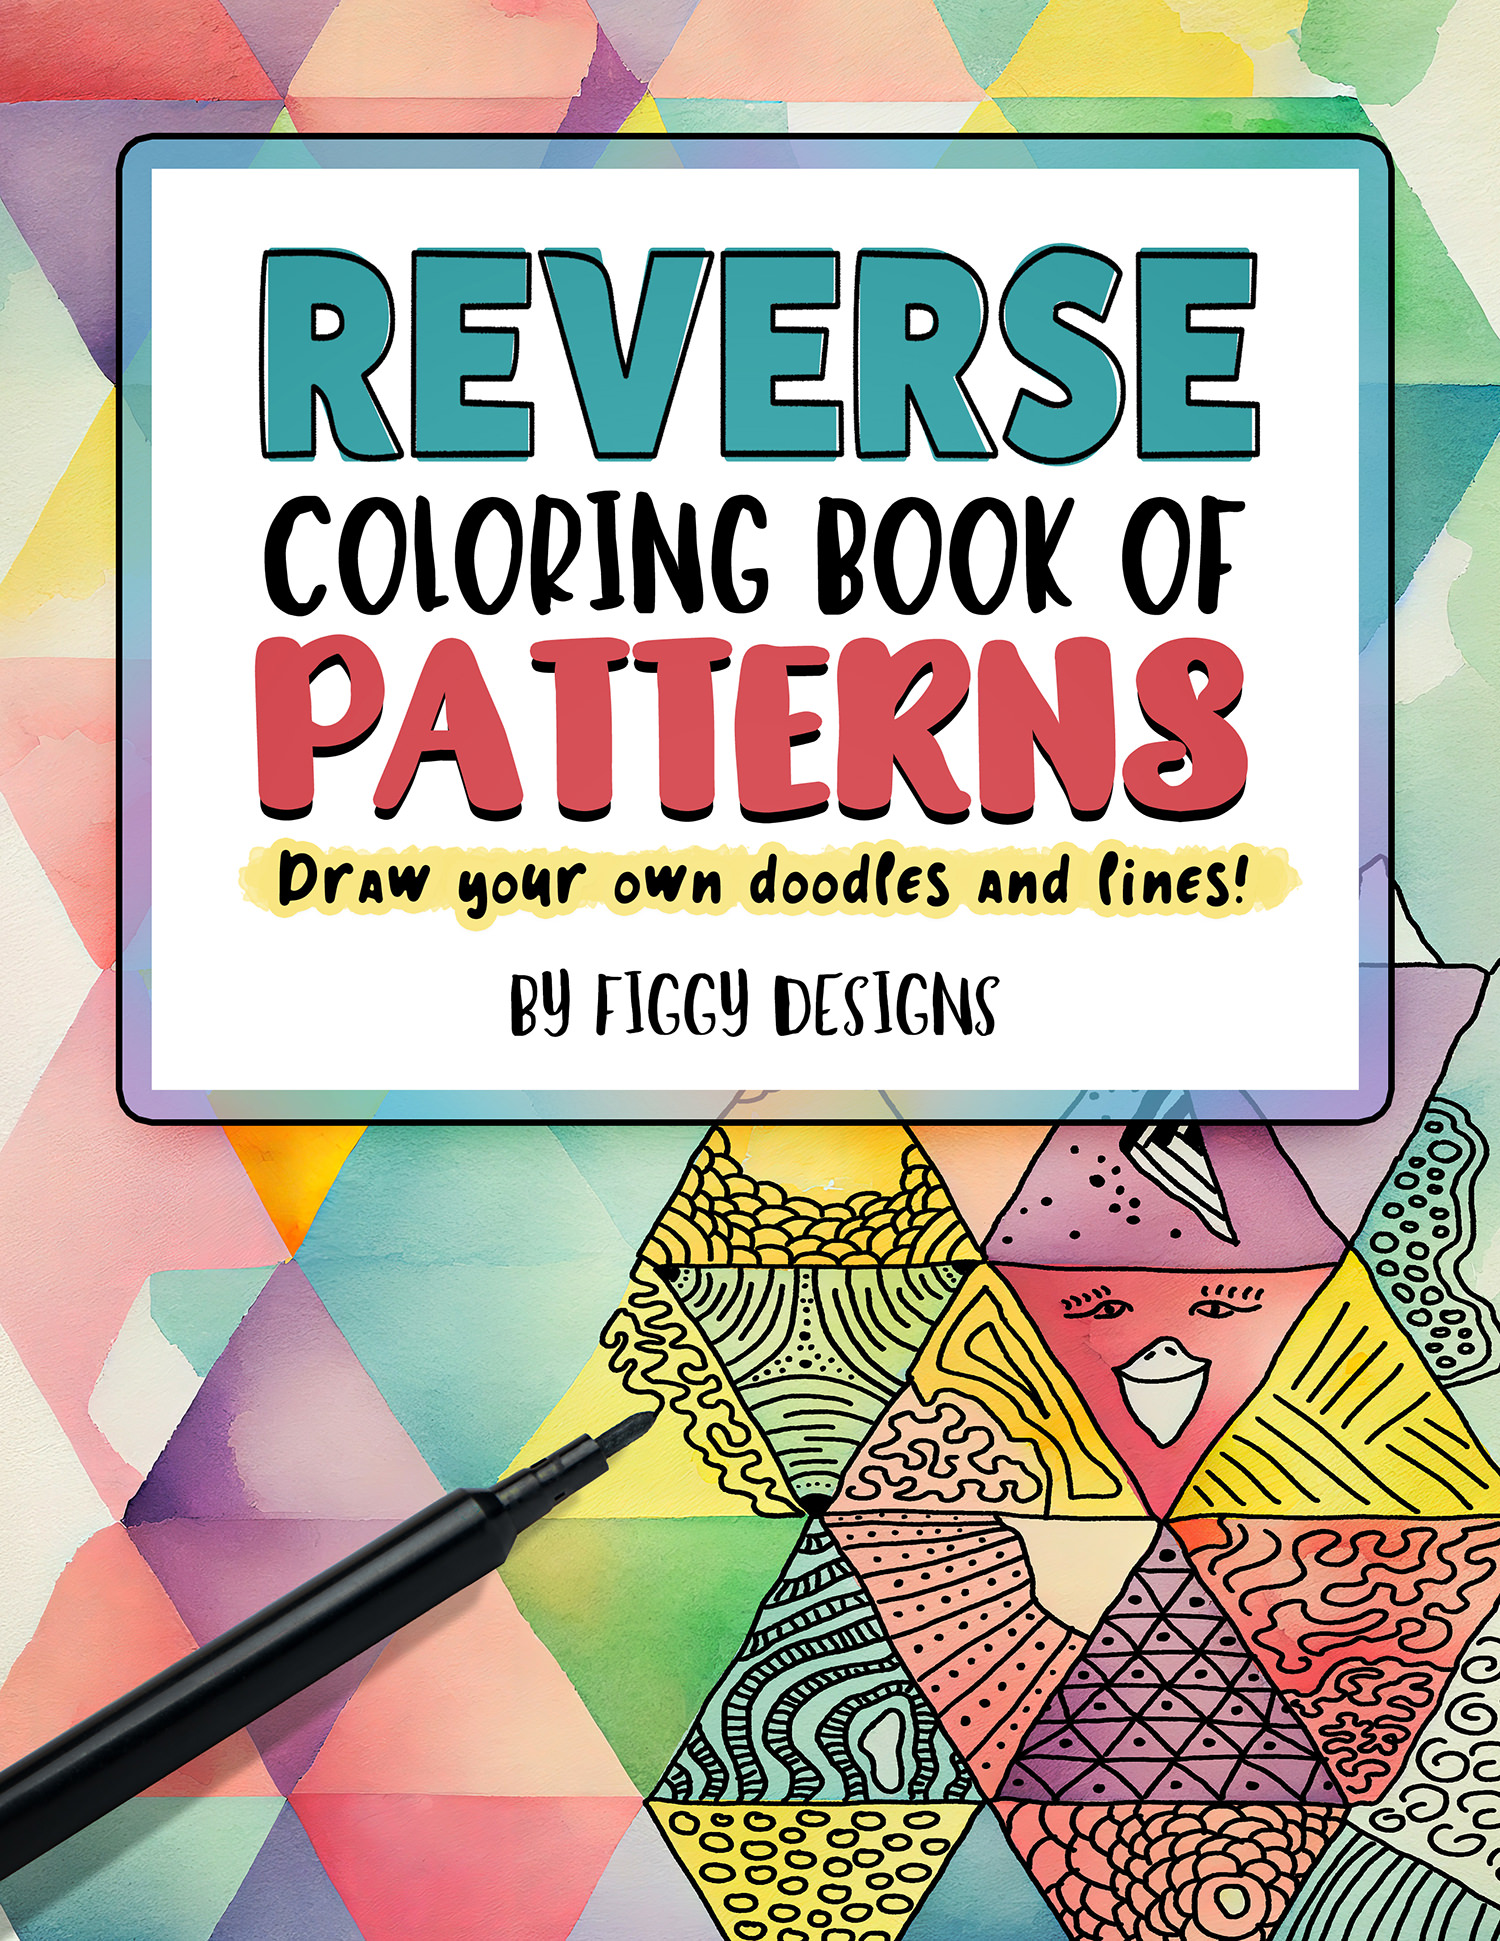 Reverse Coloring Book of Patterns